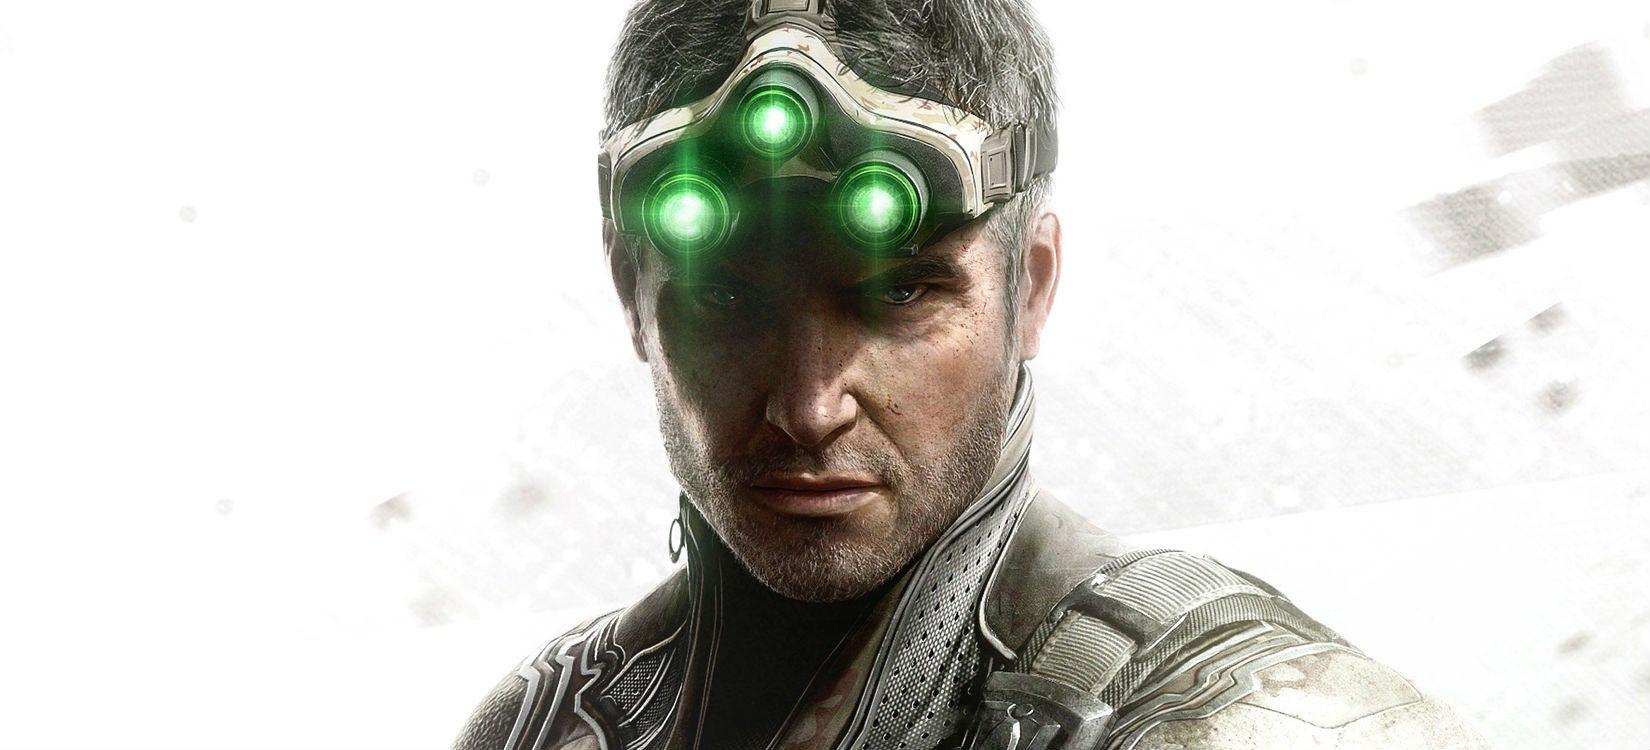 Image for New Splinter Cell Game May Have Just Been Casually Announced on Twitter [Update: "Julian Was Obviously Joking"]